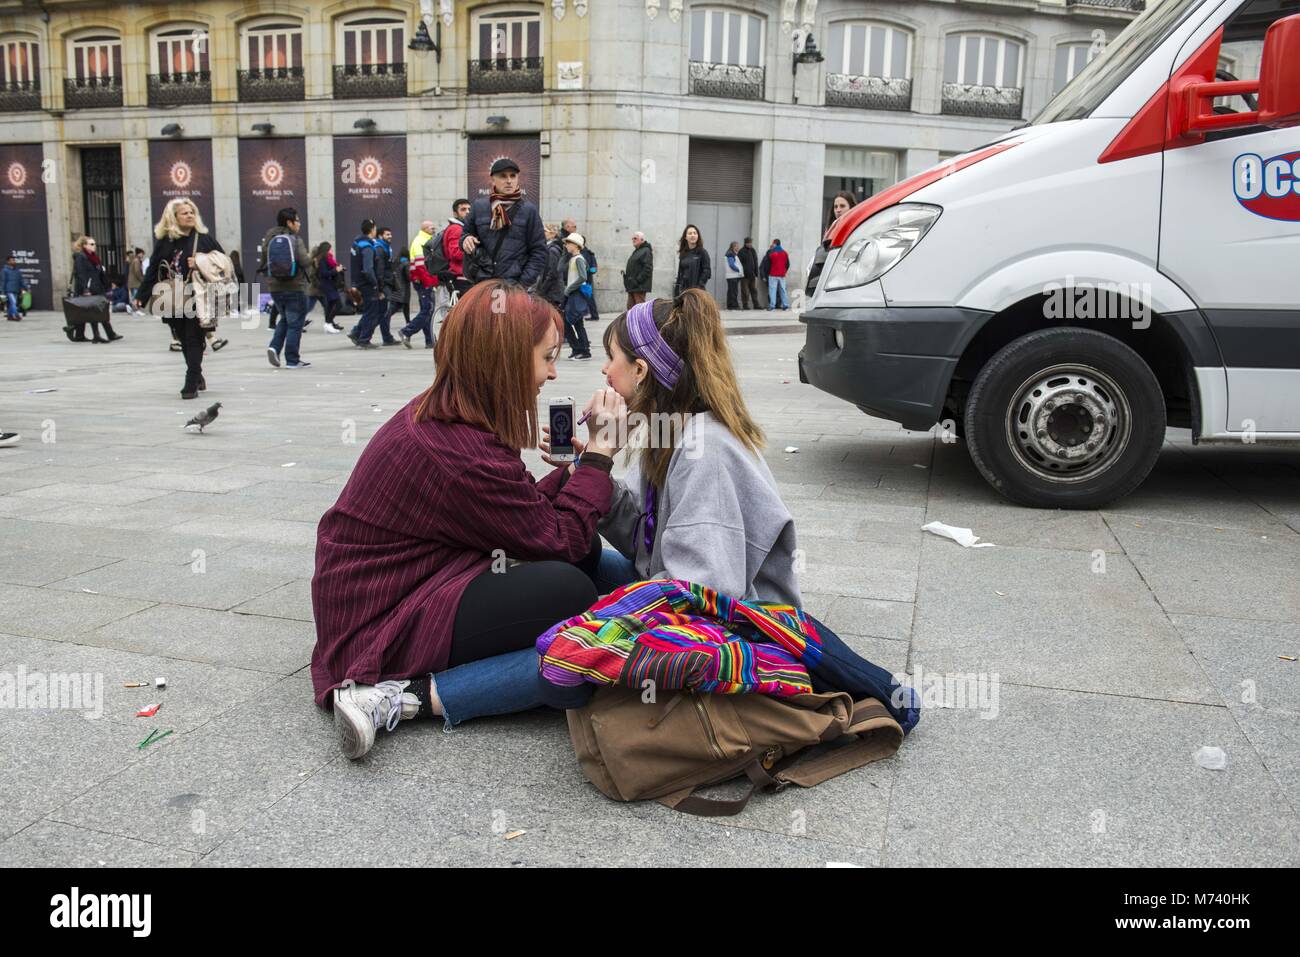 Madrid, Madrid, Spain. 8th Mar, 2018. On March 8, the International Women's Day is celebrated. A feminist strike will be held. There has been a festive and vindictive atmosphere during the day. Credit: Nacho Guadano/ZUMA Wire/Alamy Live News Stock Photo